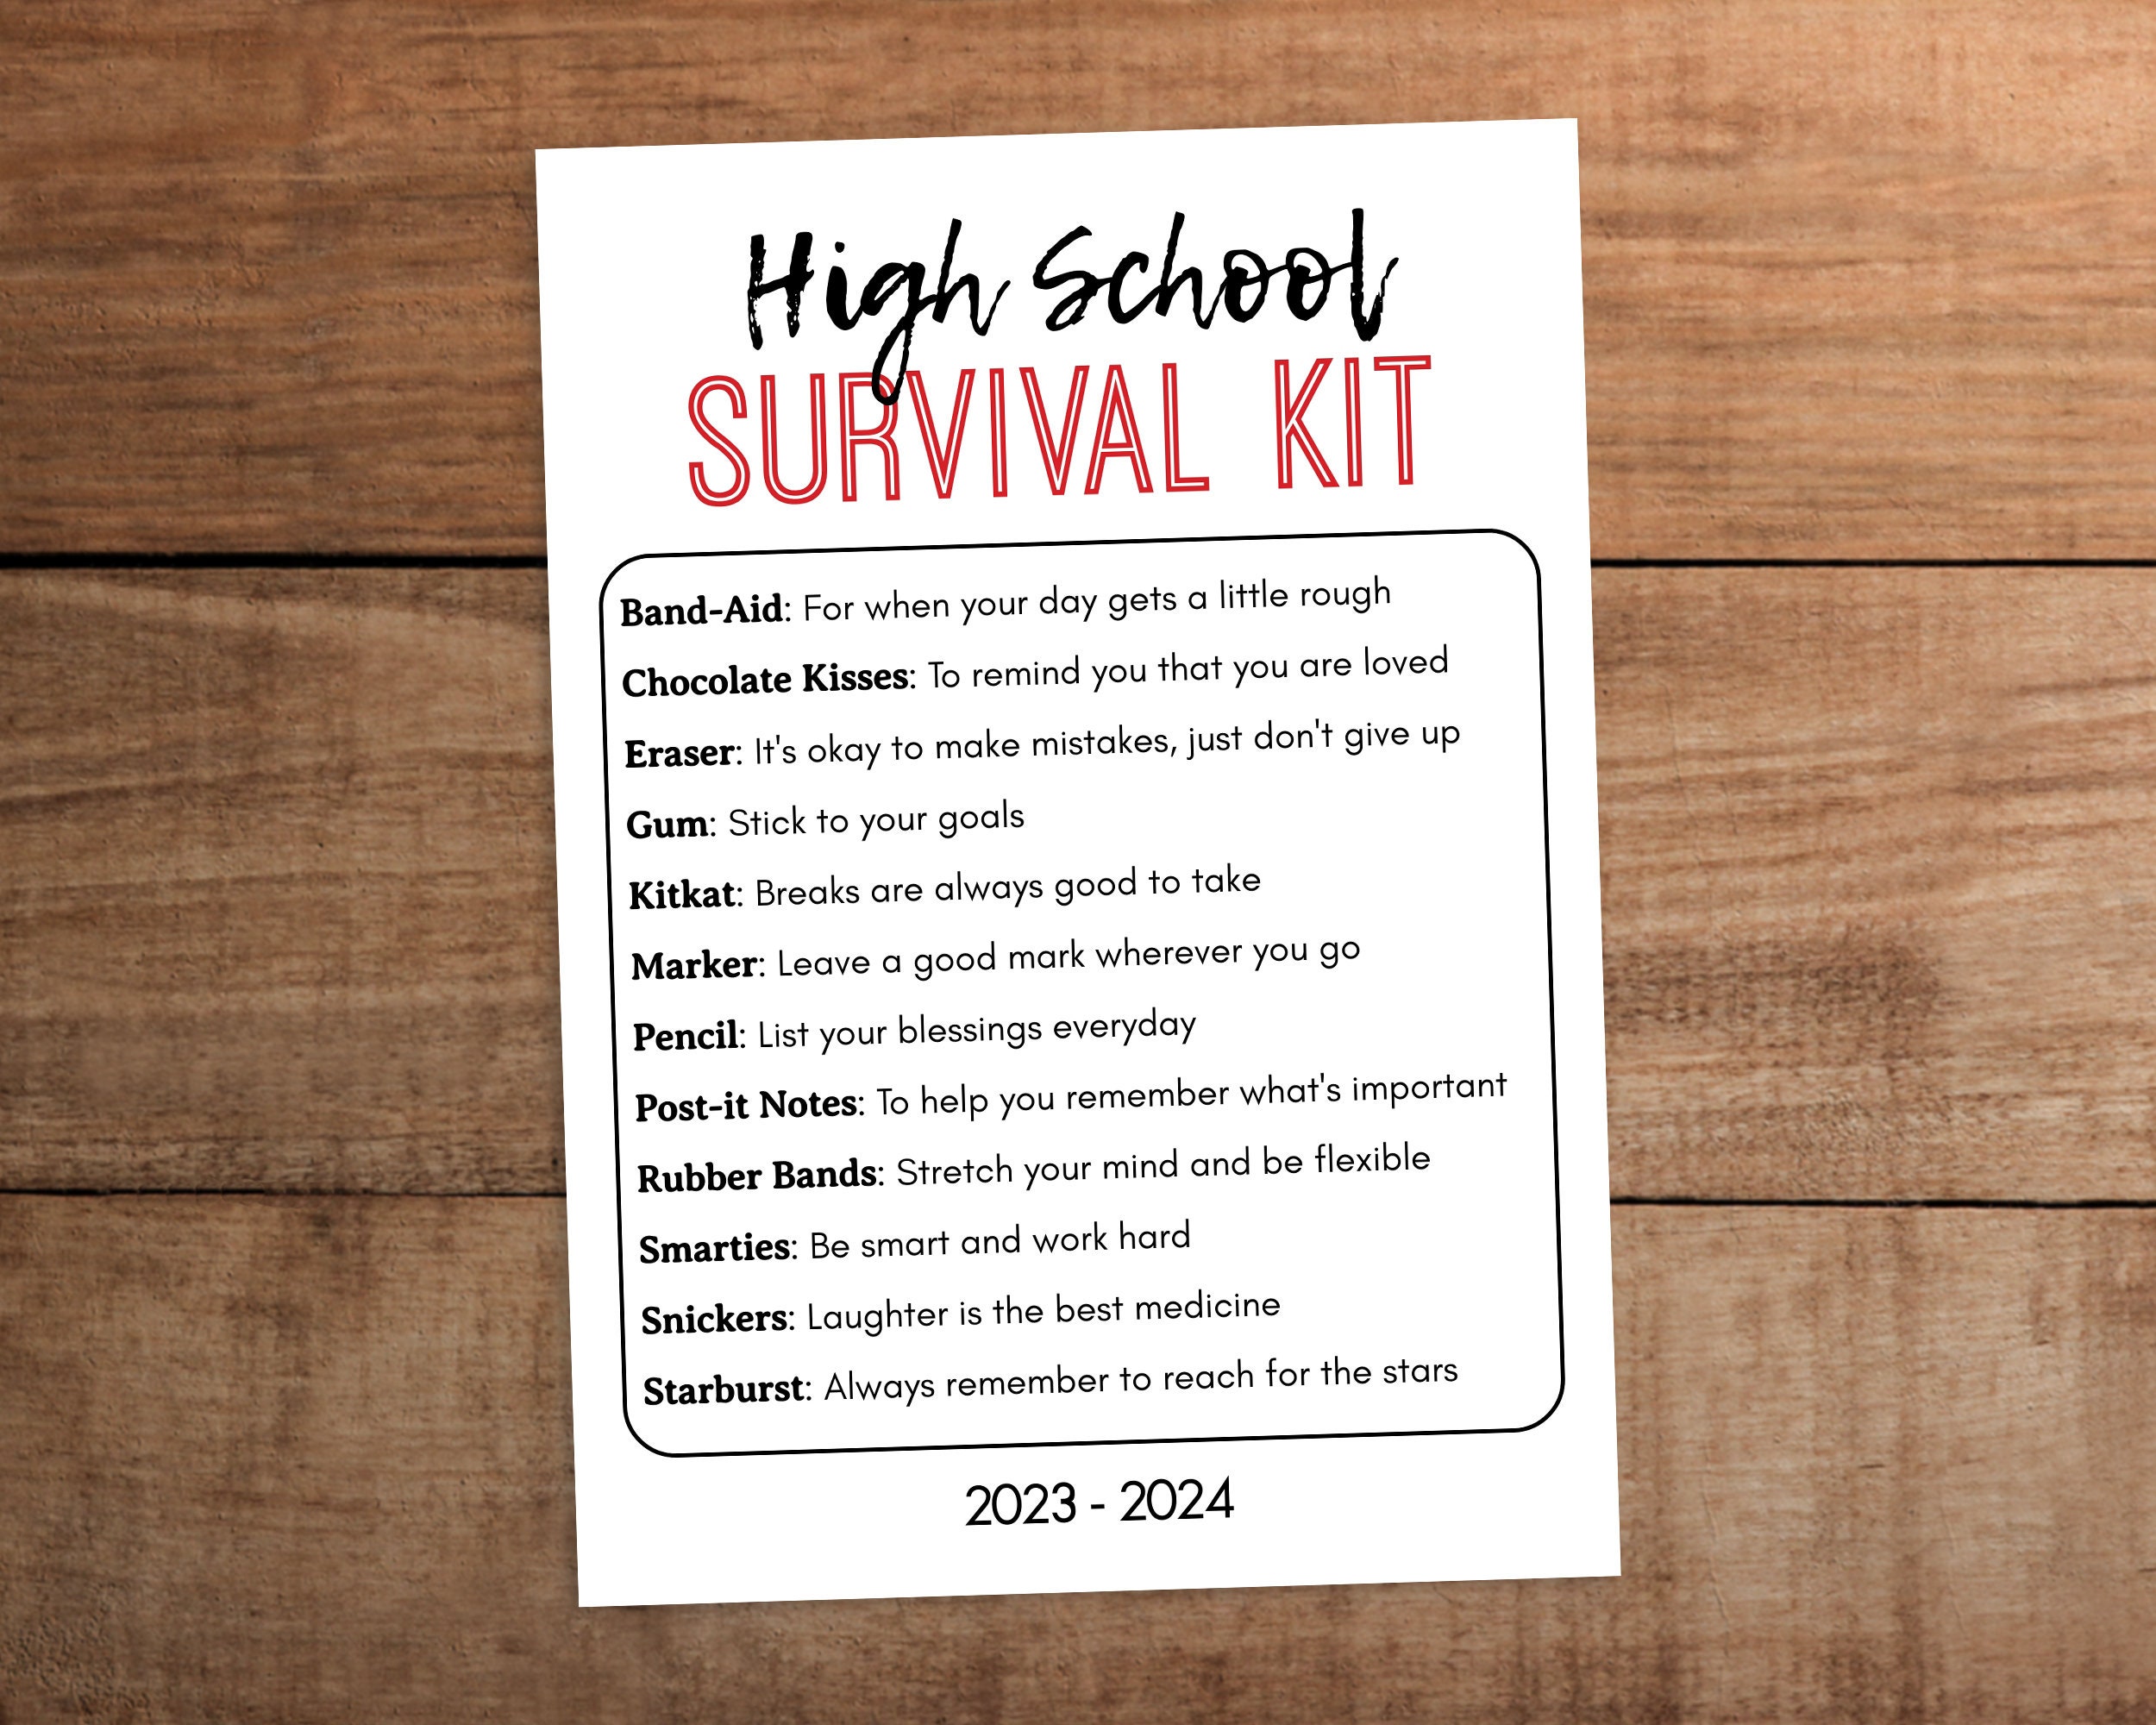 Permanent Marker (Sharpie) — Campus Survival Kits and Insta-Kits